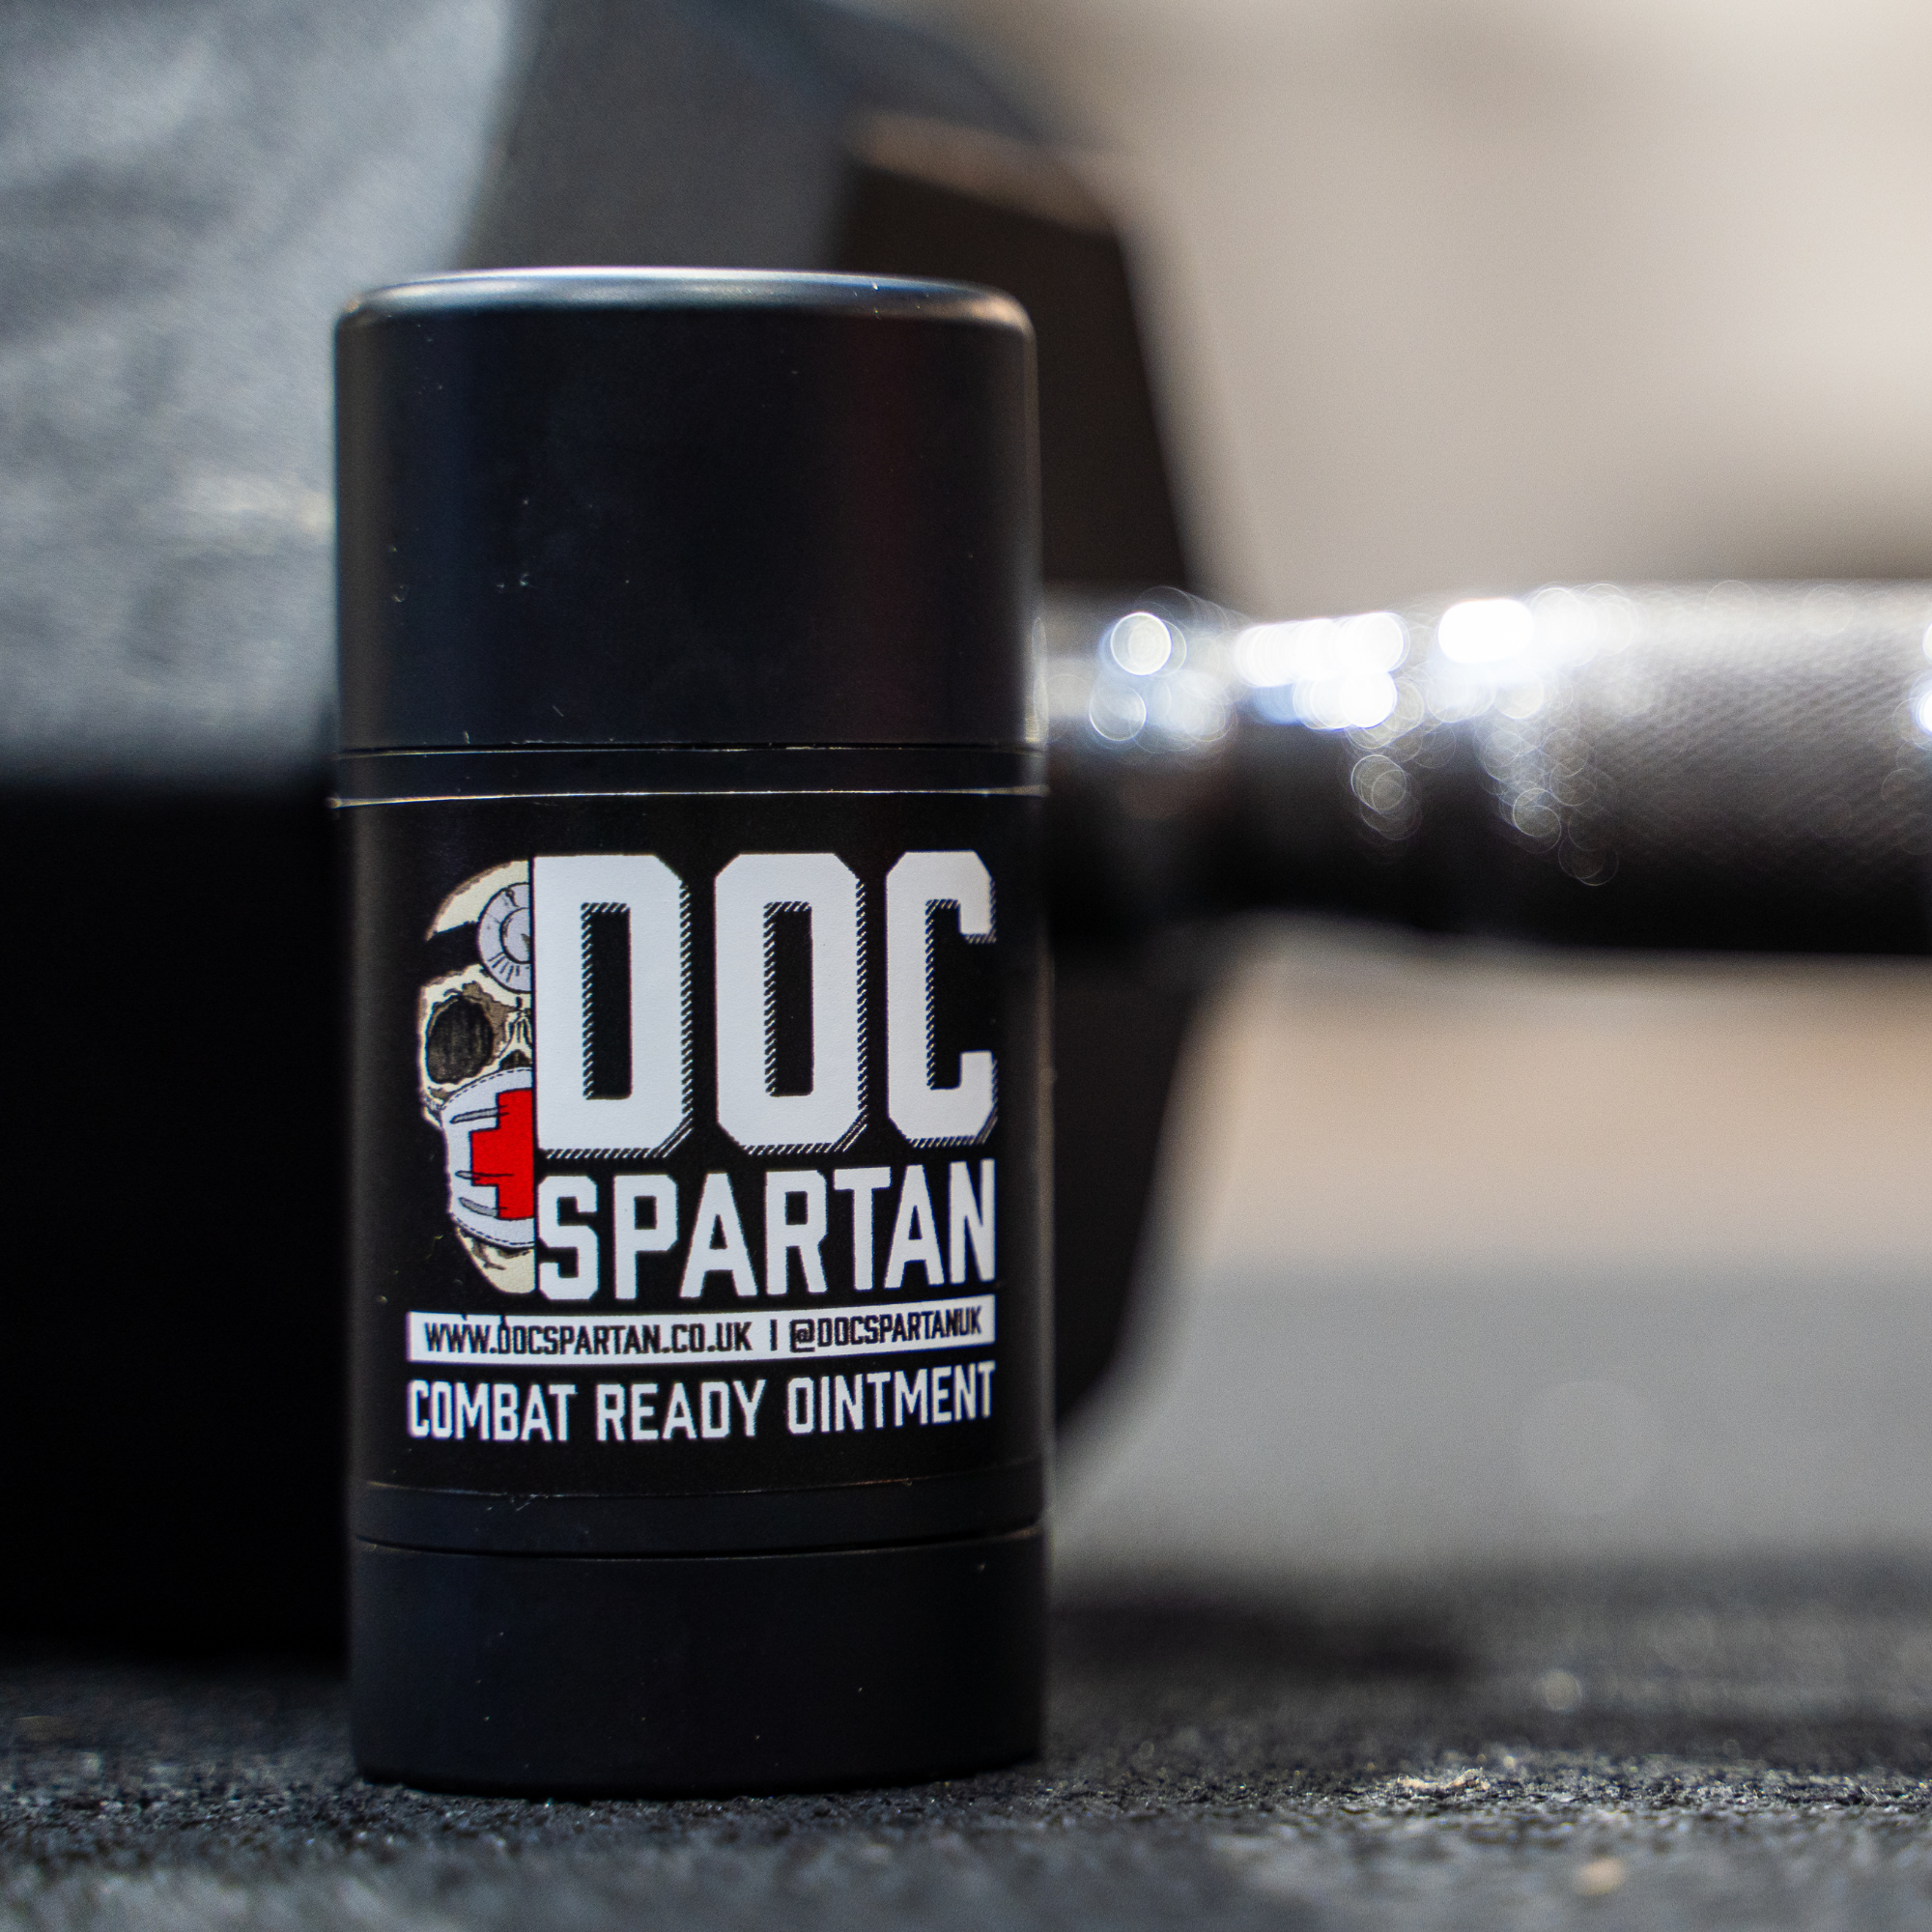 Doc Spartan Combat Ready Ointment Hand Care - Handheld Wound Device Plus